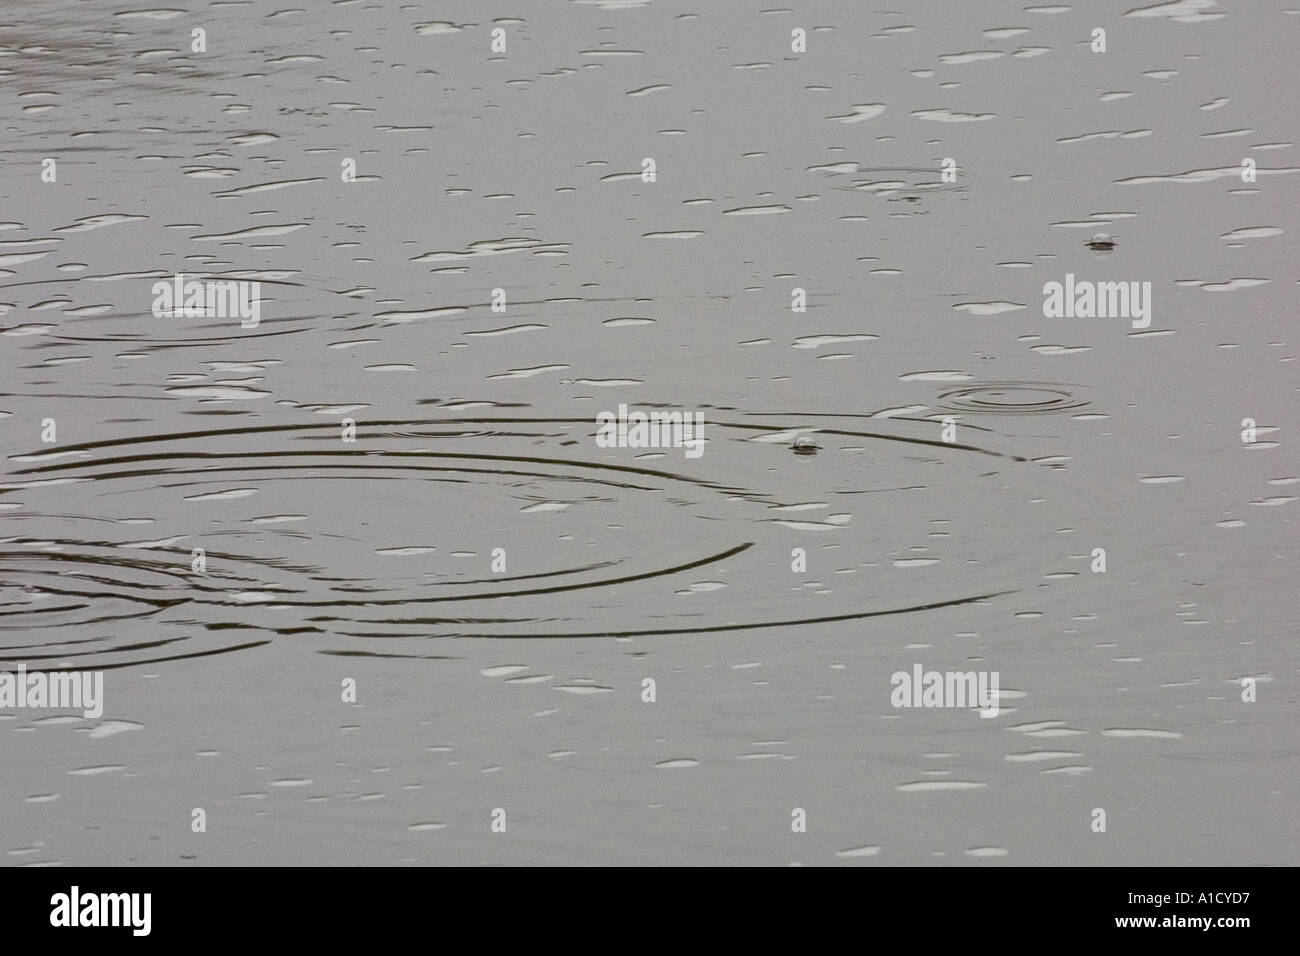 Water droplets disturbing the river surface Stock Photo